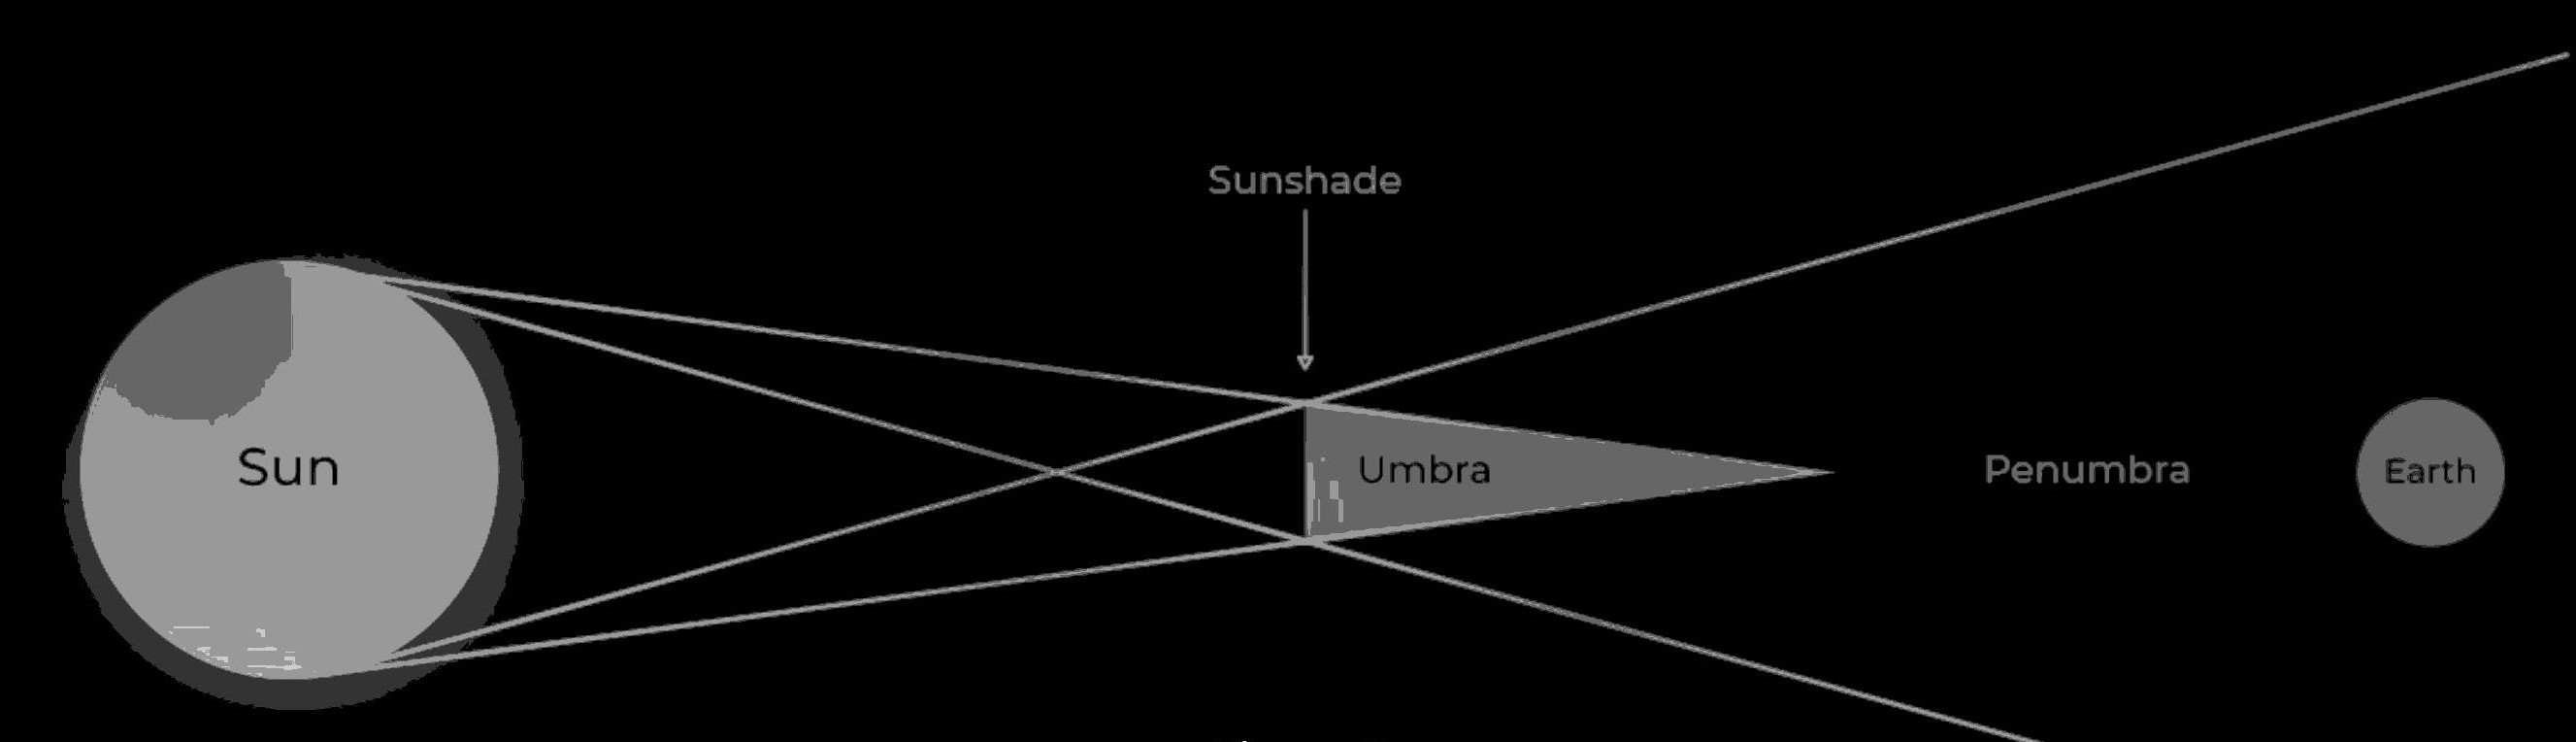 a diagram showing how a shade in space could keep some solar radiation from reach Earth